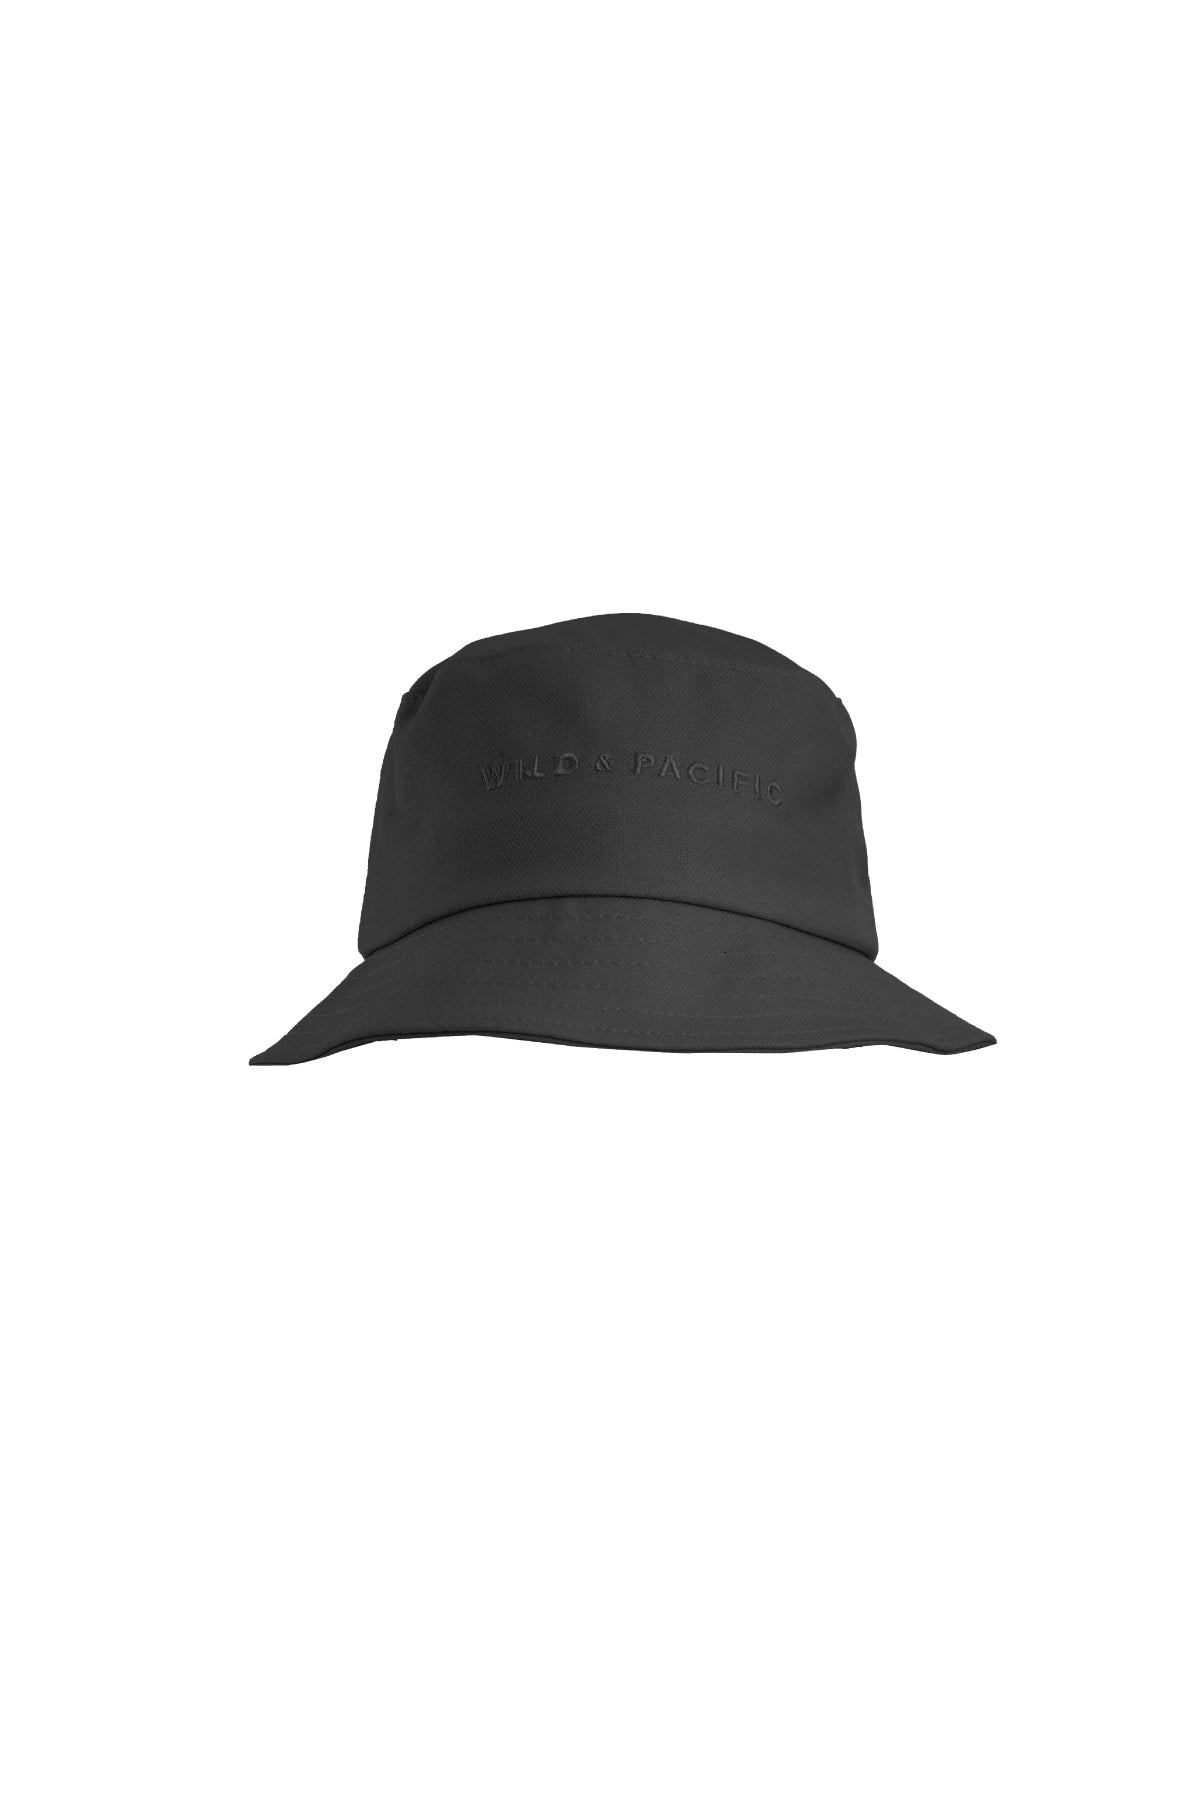 PANTHER - BUCKET - HAT